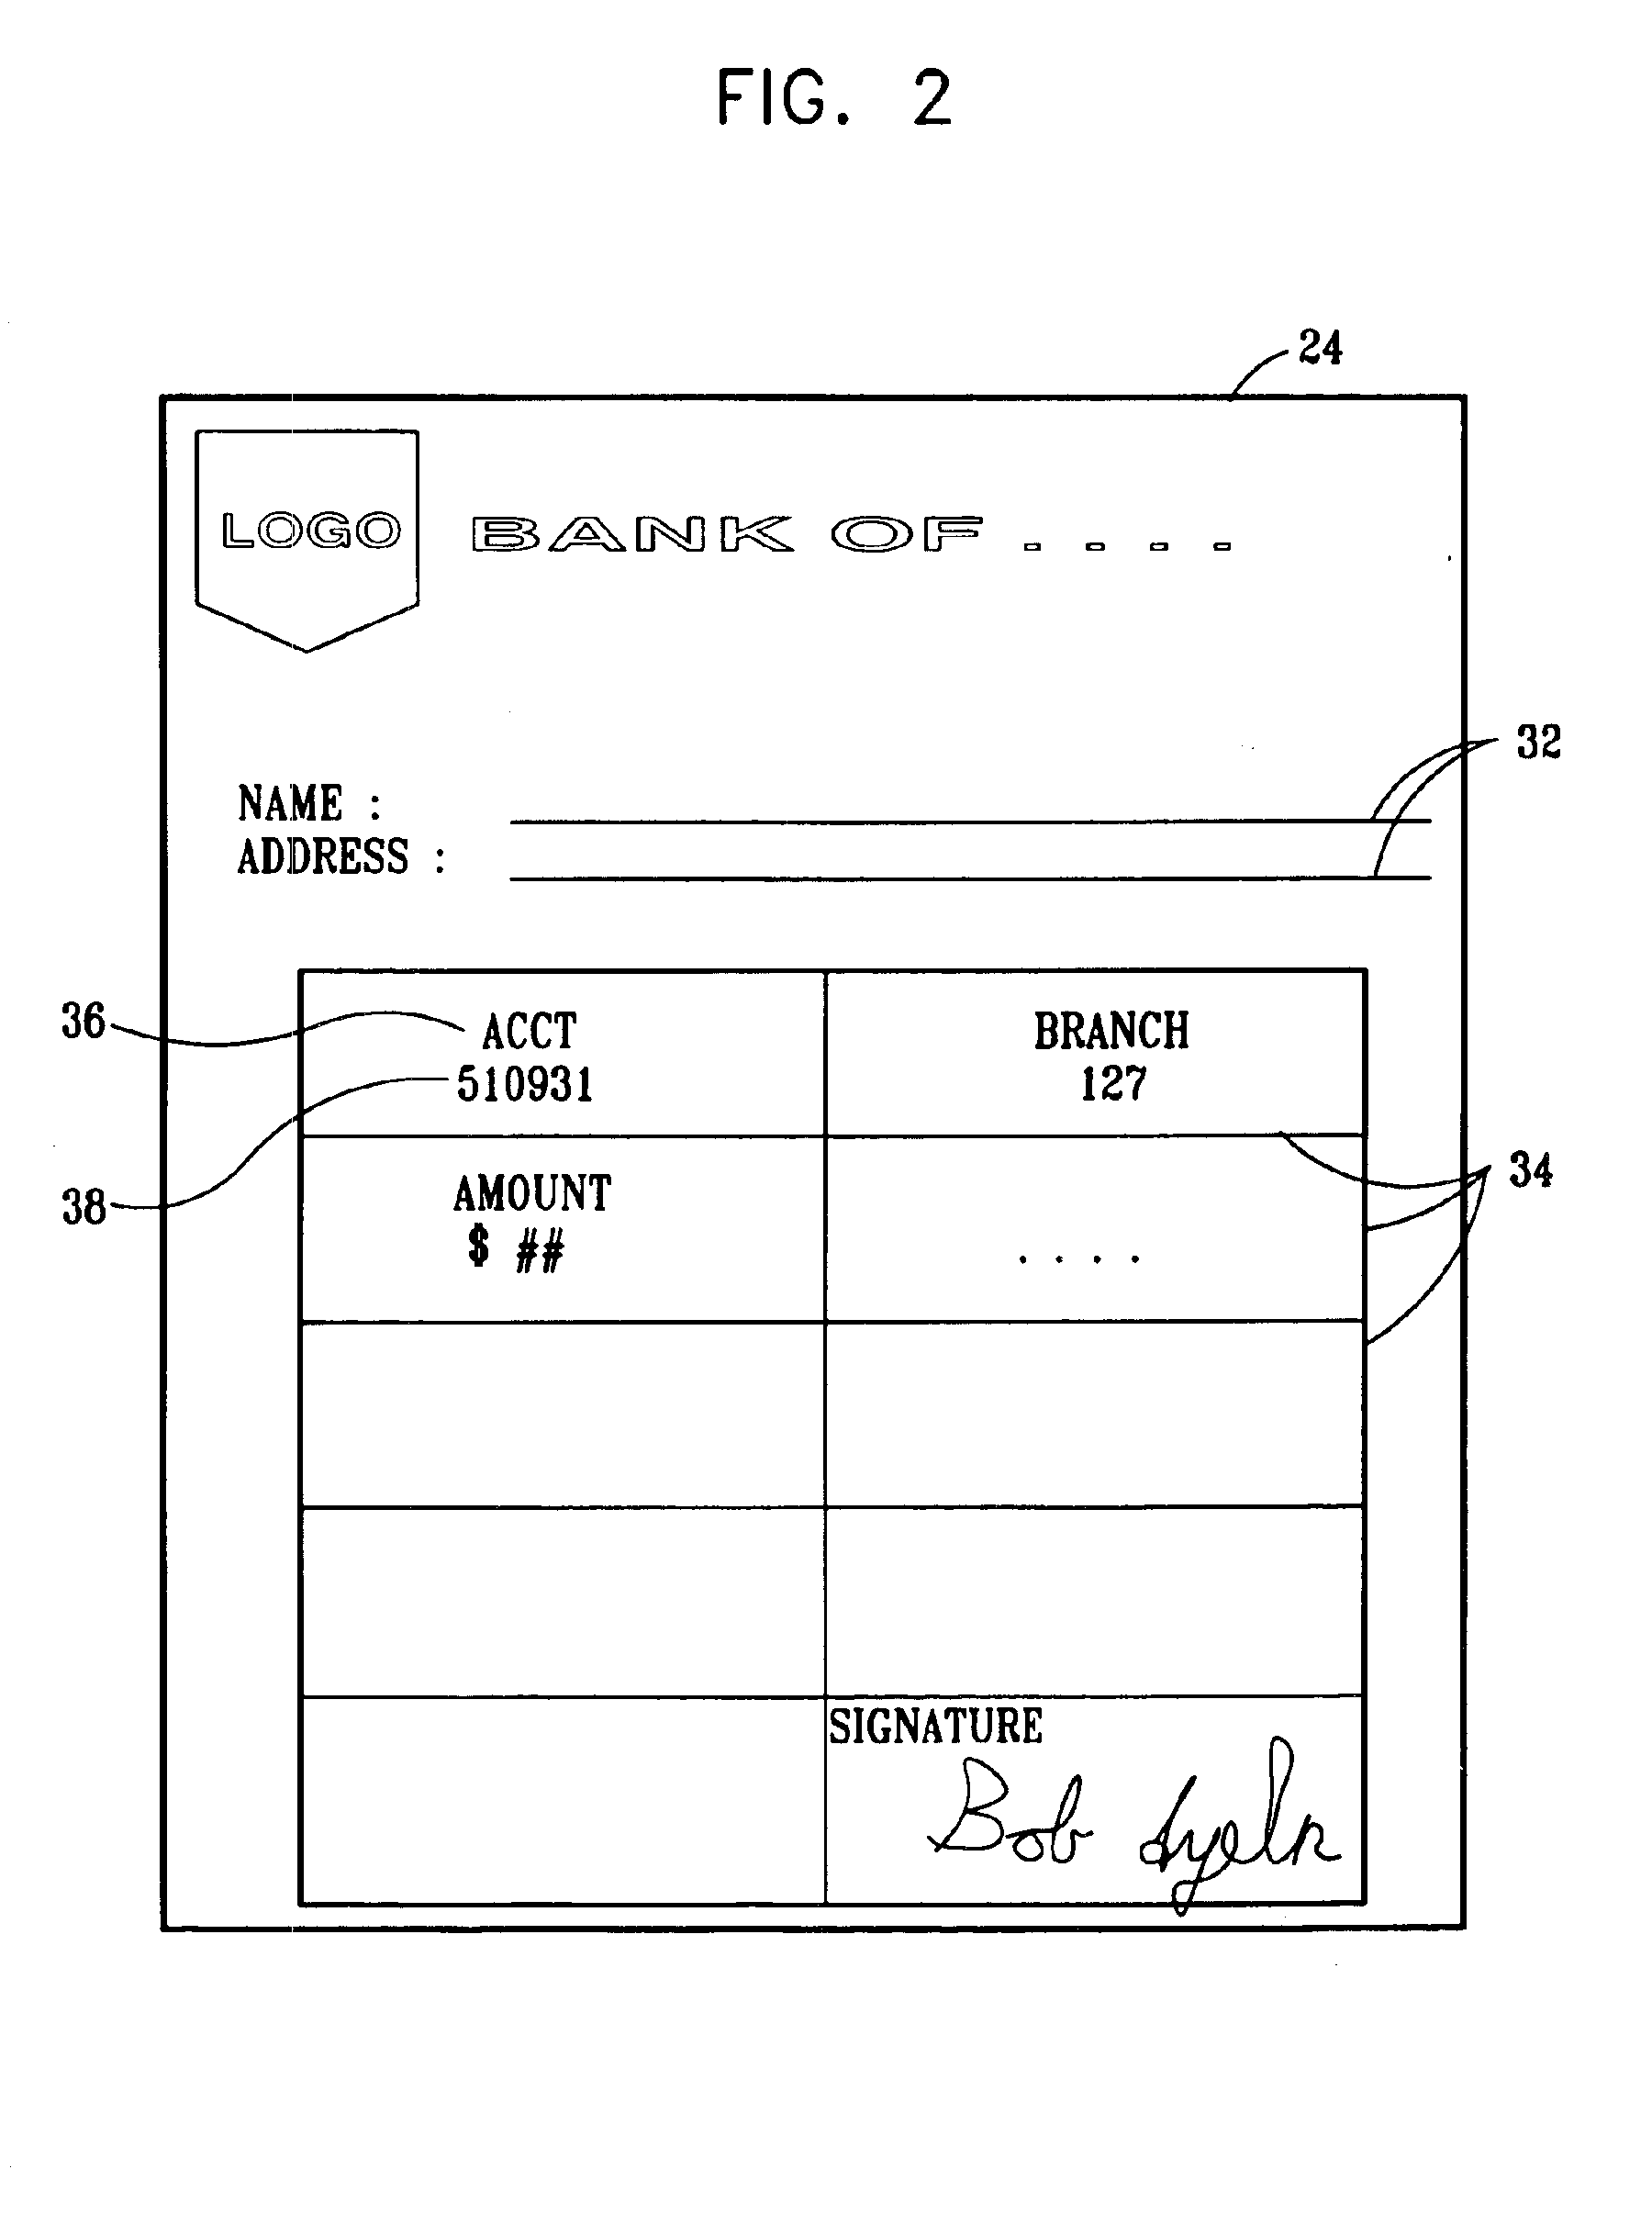 Automatic template and field definition in form processing